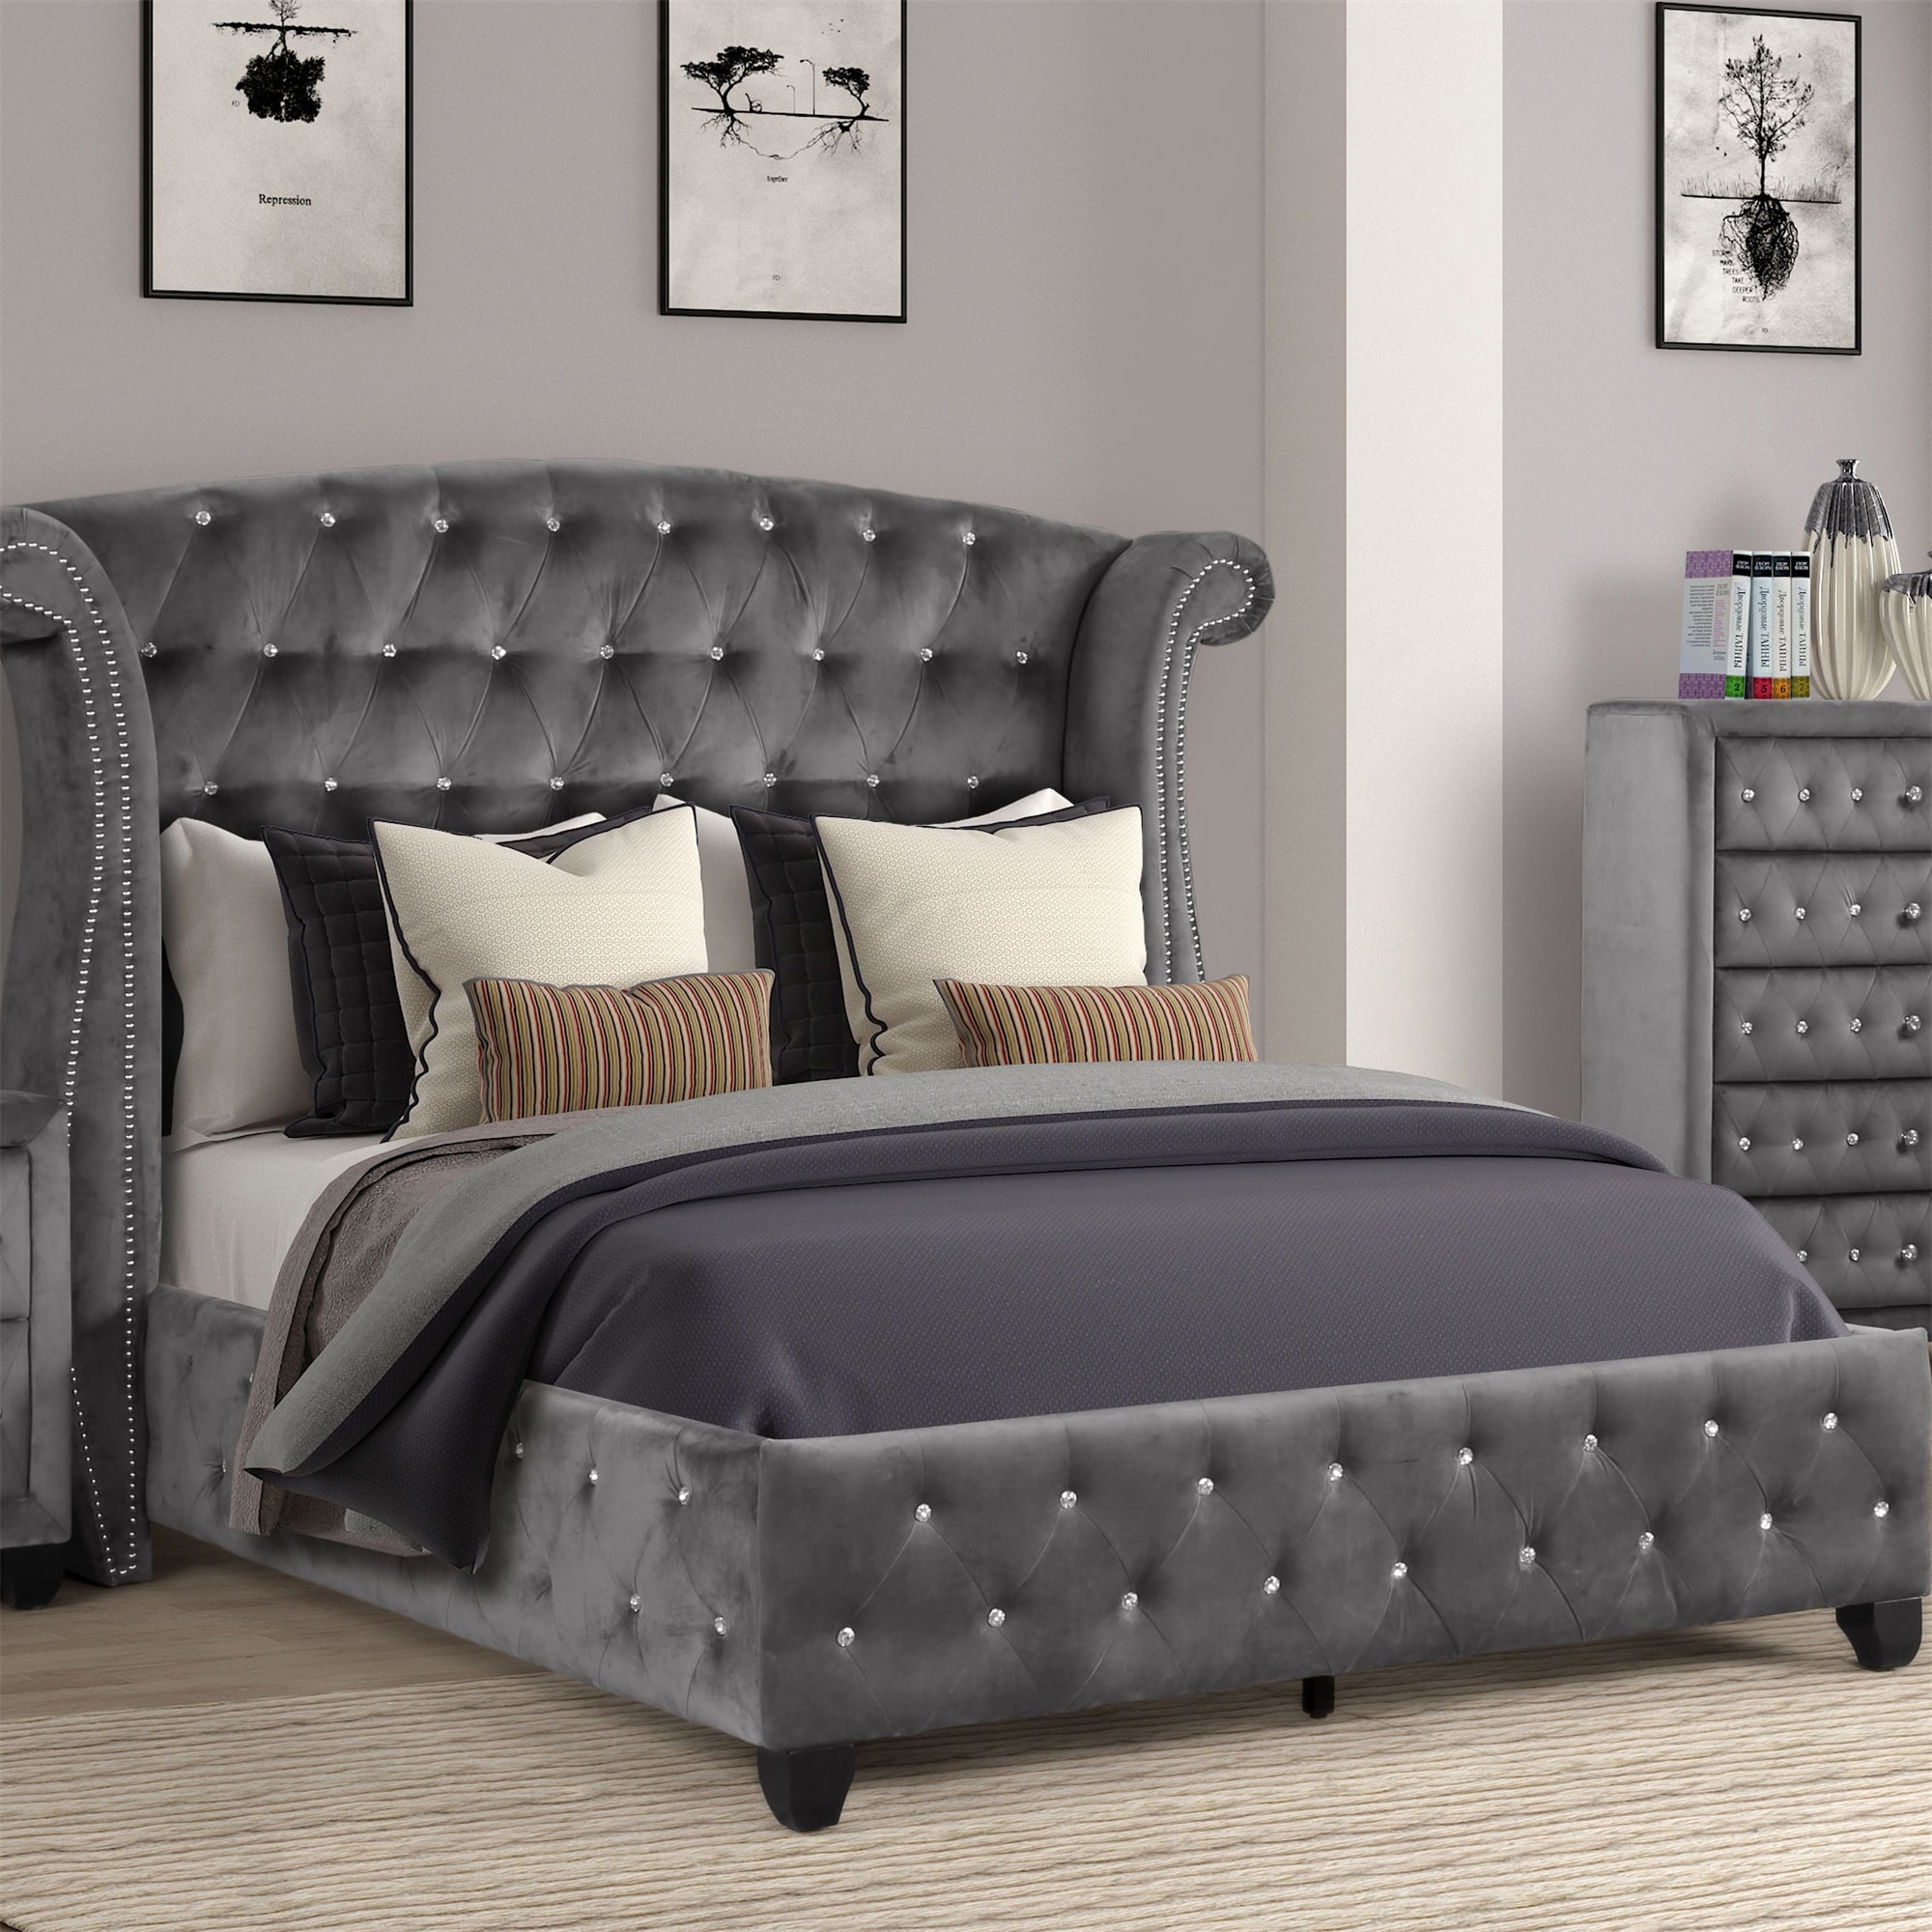 Royalty Queen Bed Button Tufted Upholstered Rockstar  No Mattress